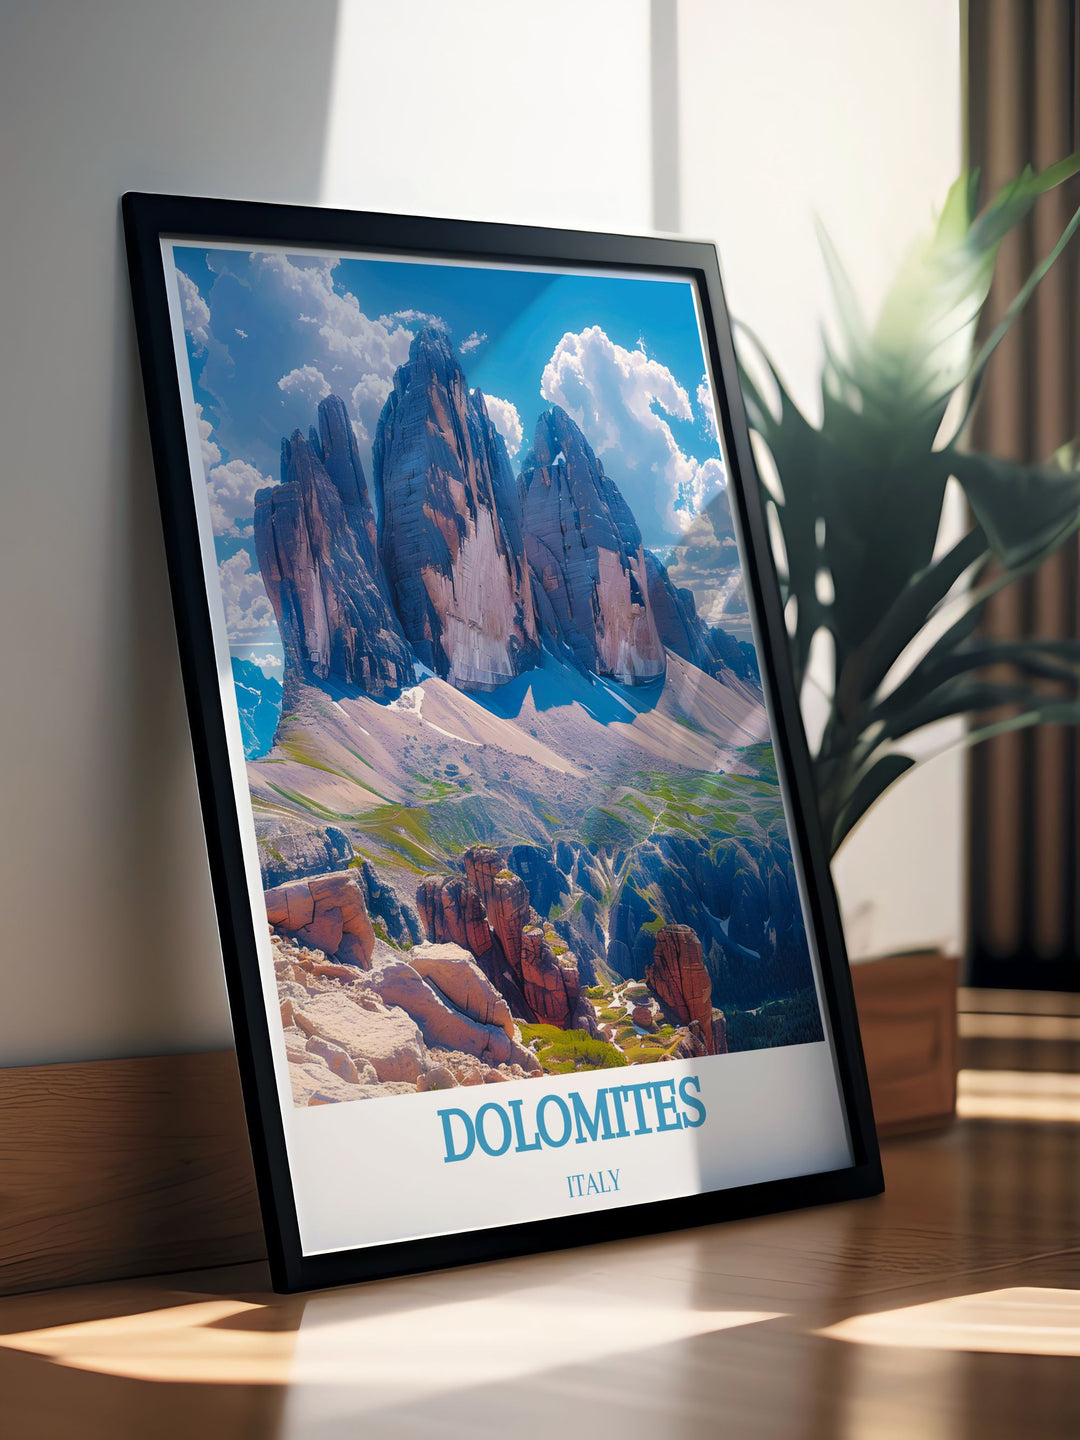 Framed art showcasing the stunning views of the Dolomites, capturing the natural splendor and alpine beauty of Italys iconic mountain range.